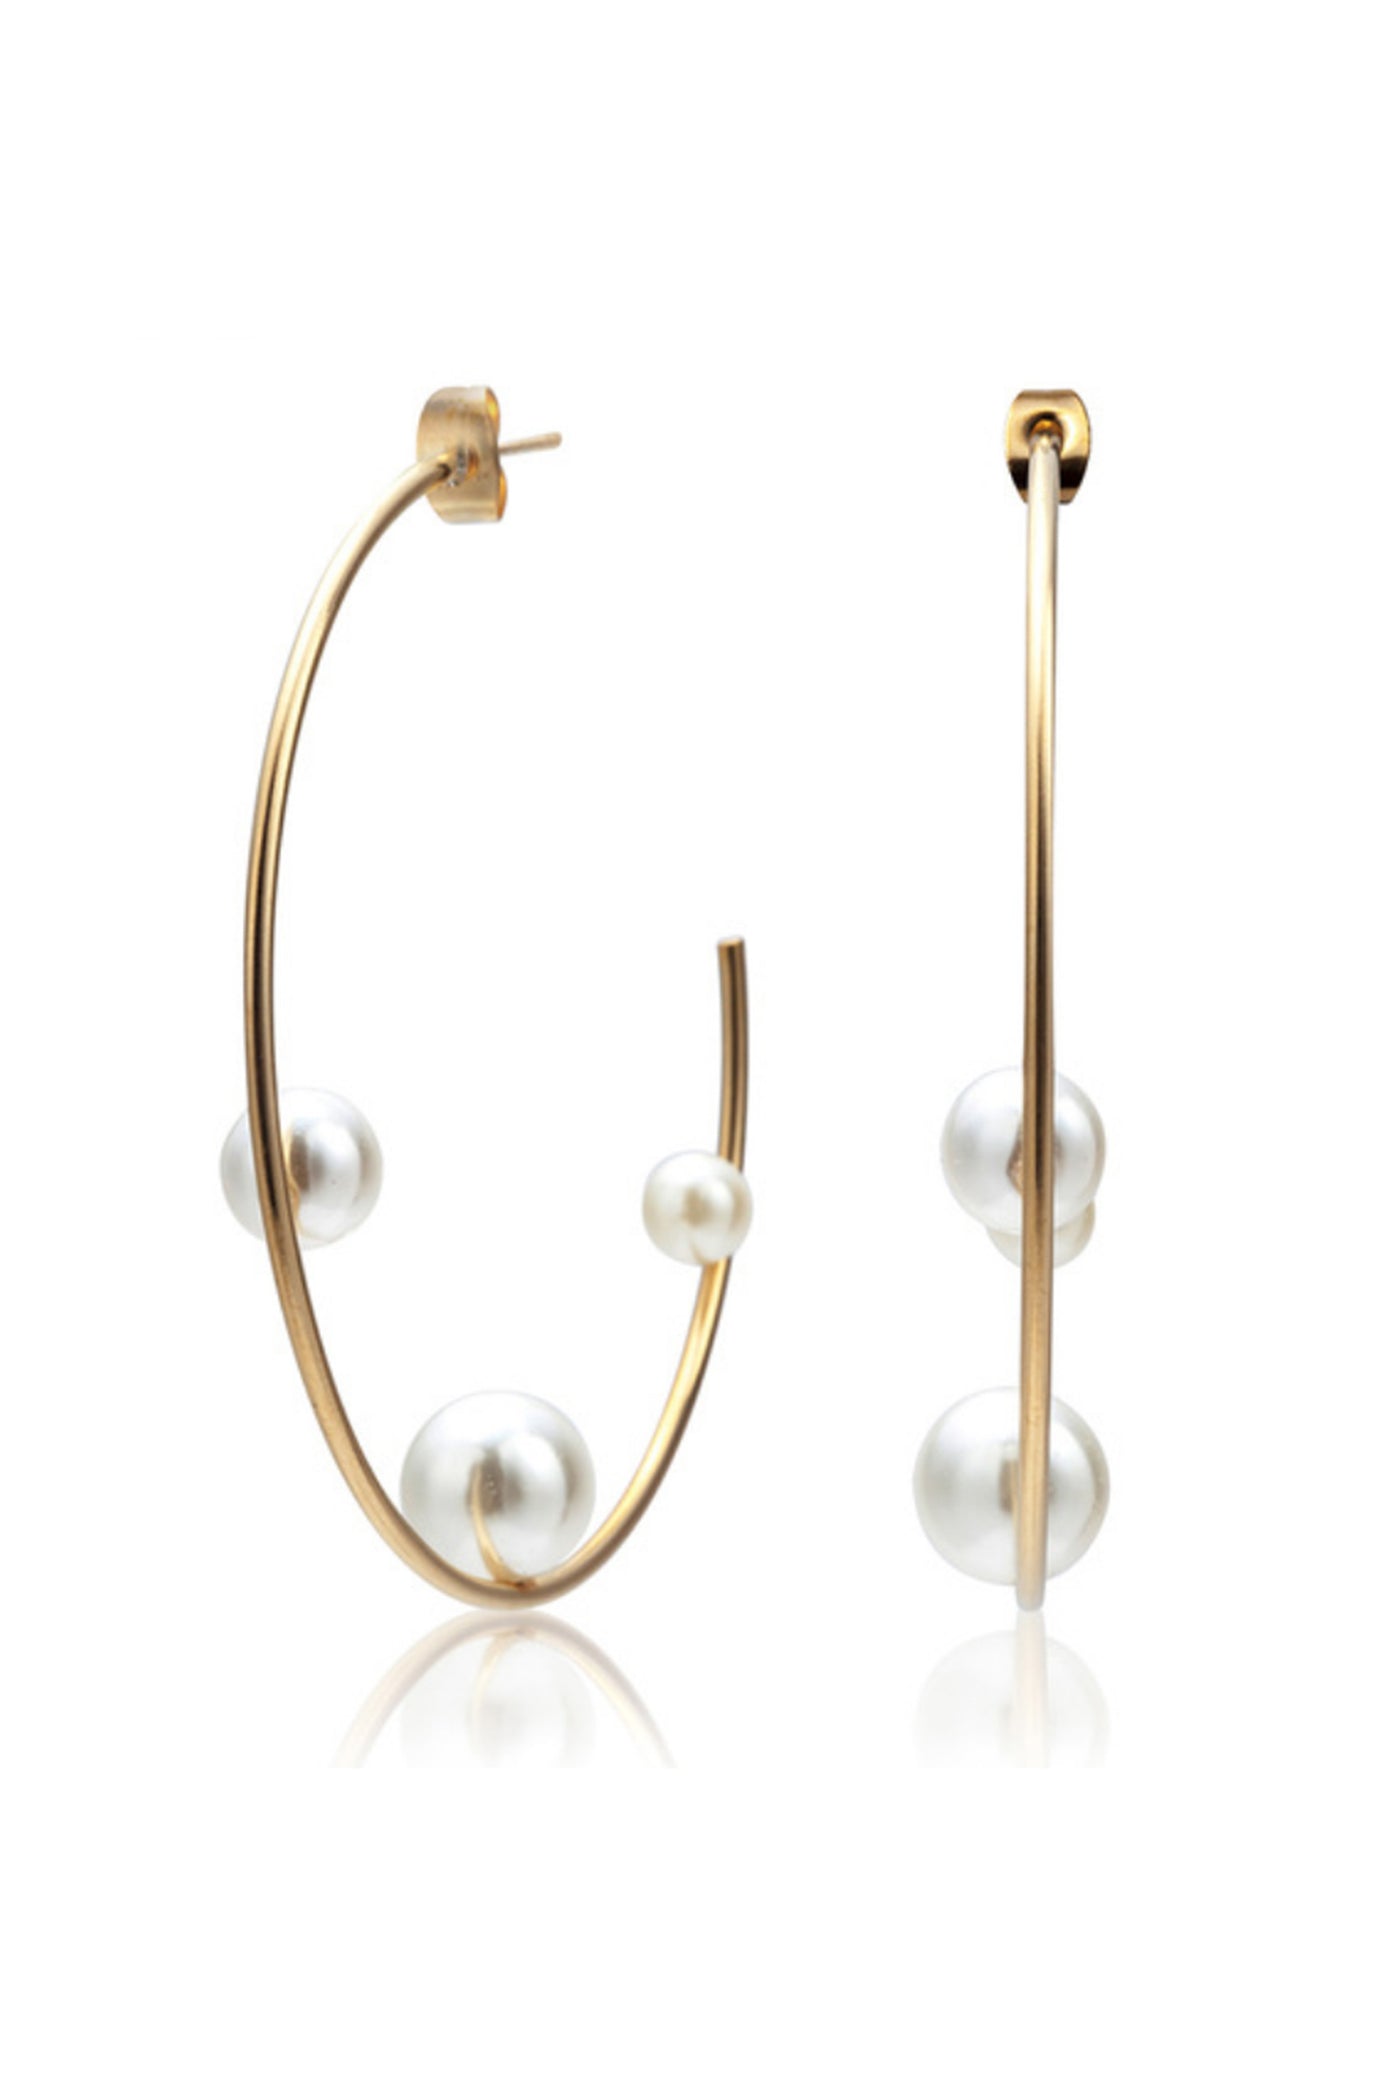 These oversized gold hoops with three pearl details are the perfect accessory for modest everyday dresses.